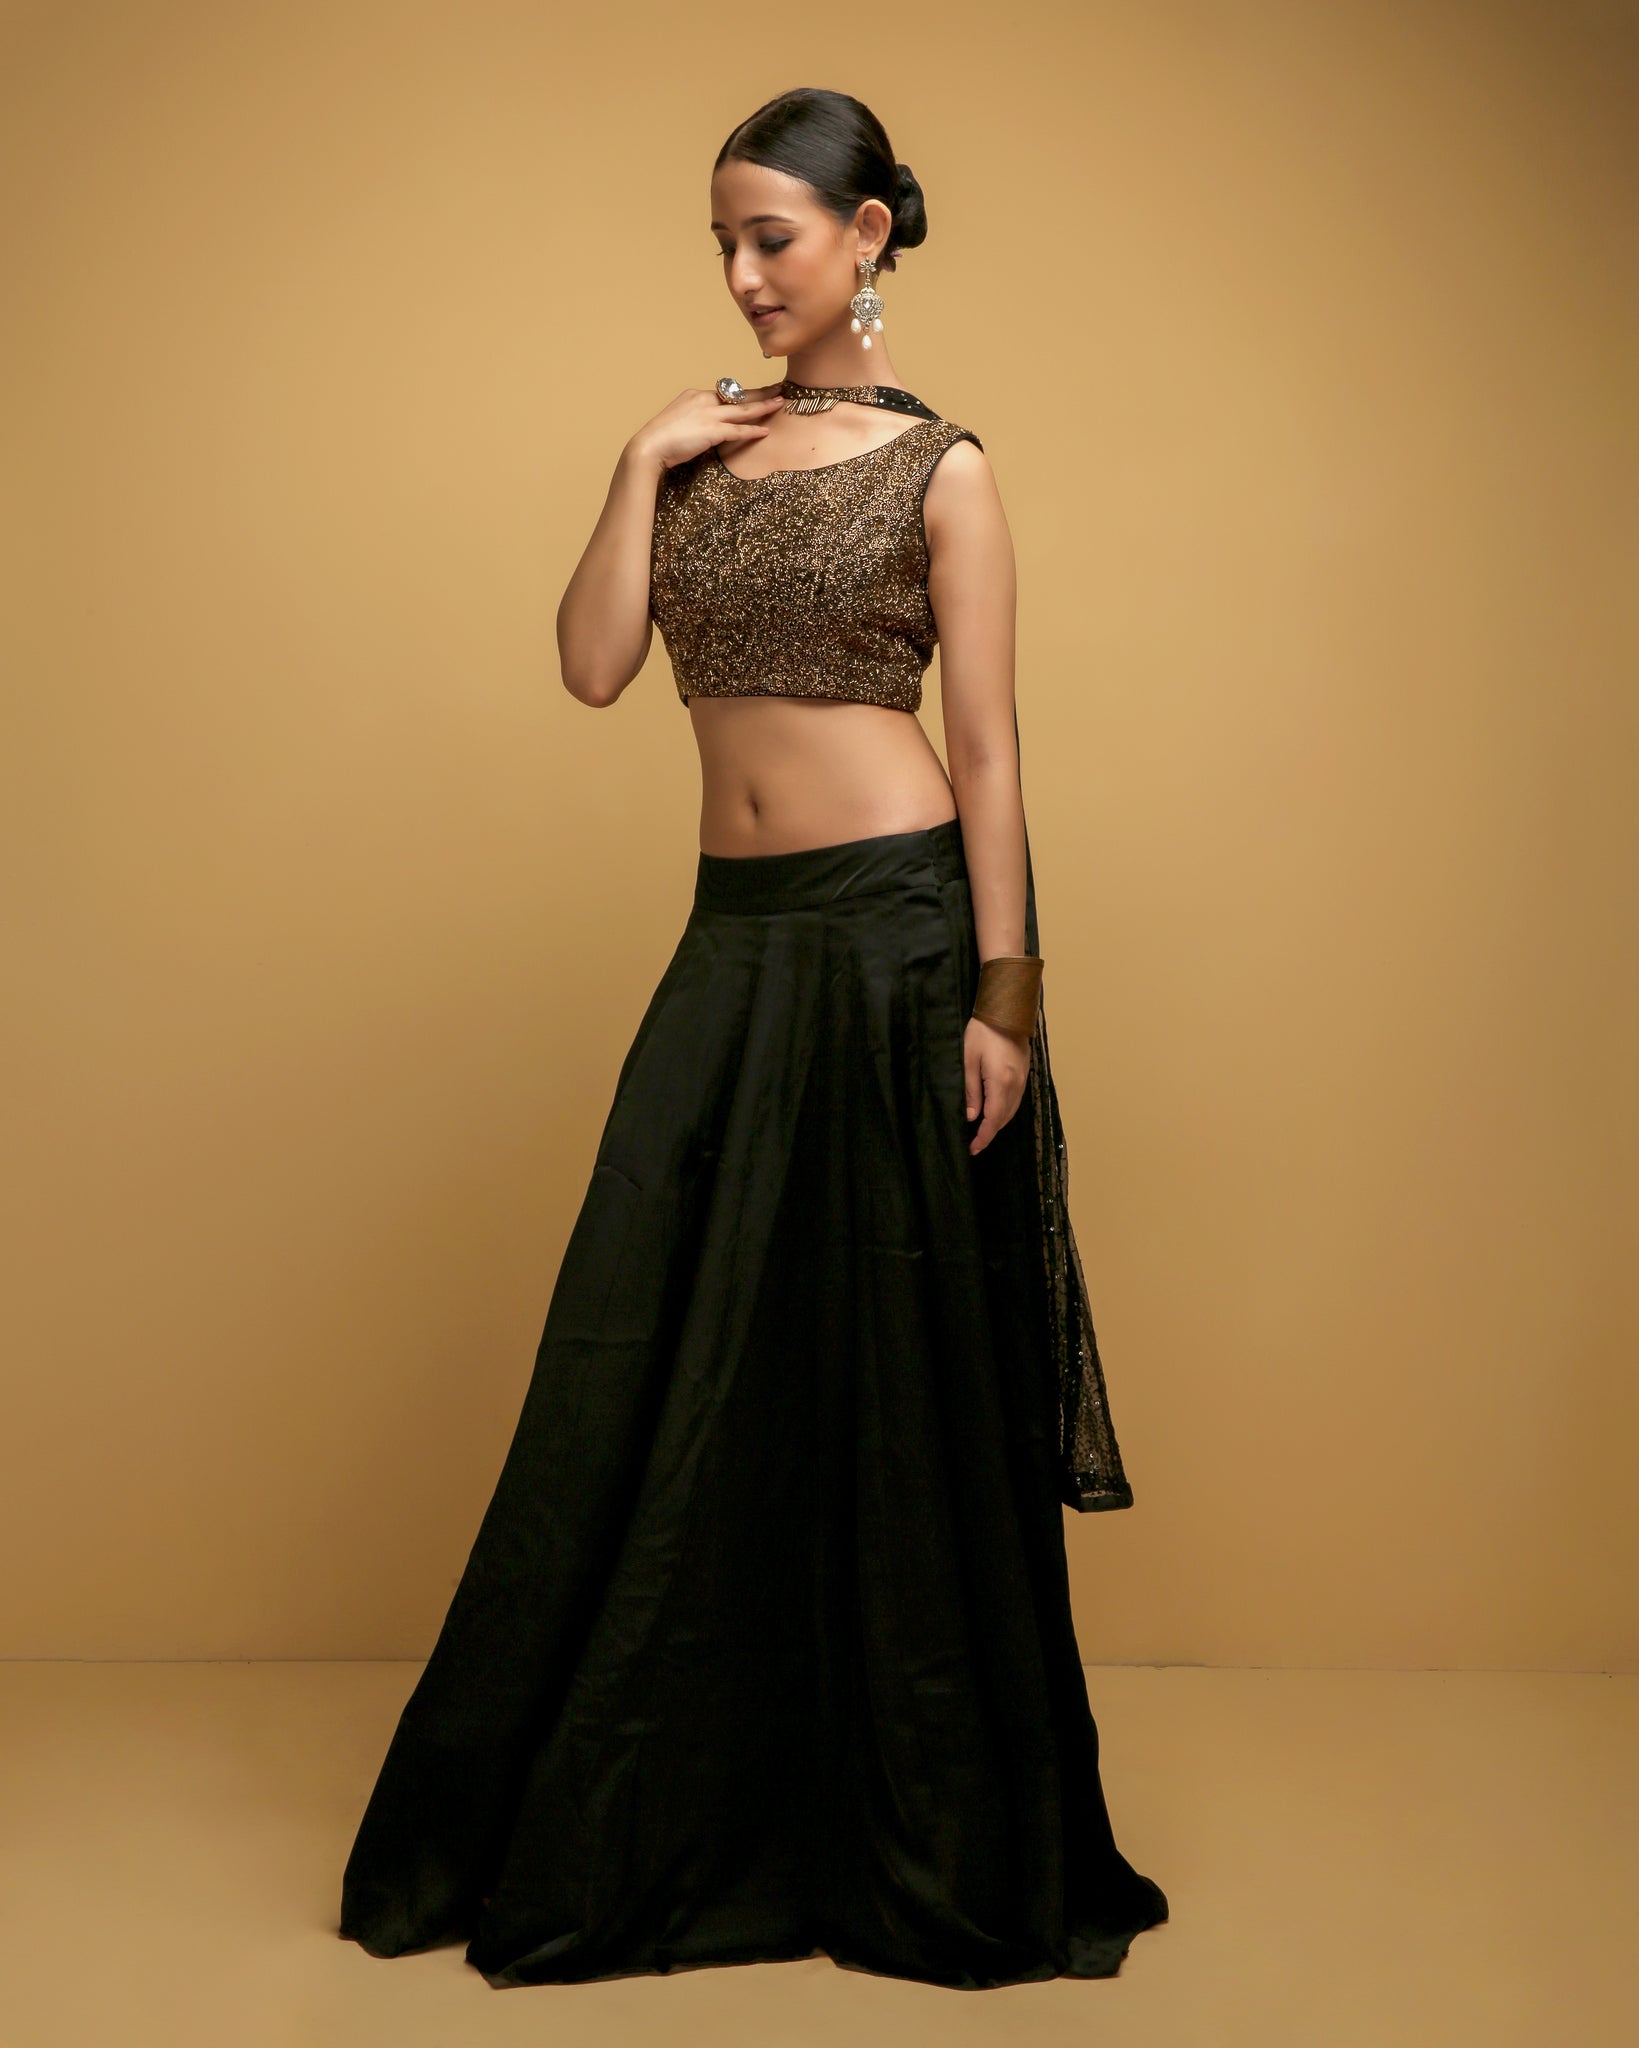 Black Silk Bridesmaid Wedding Lehenga Skirt With Golden Zari Border and  Geometric Pattern Black & Gold Crop Top Blouse, Indo Western Outfit - Etsy